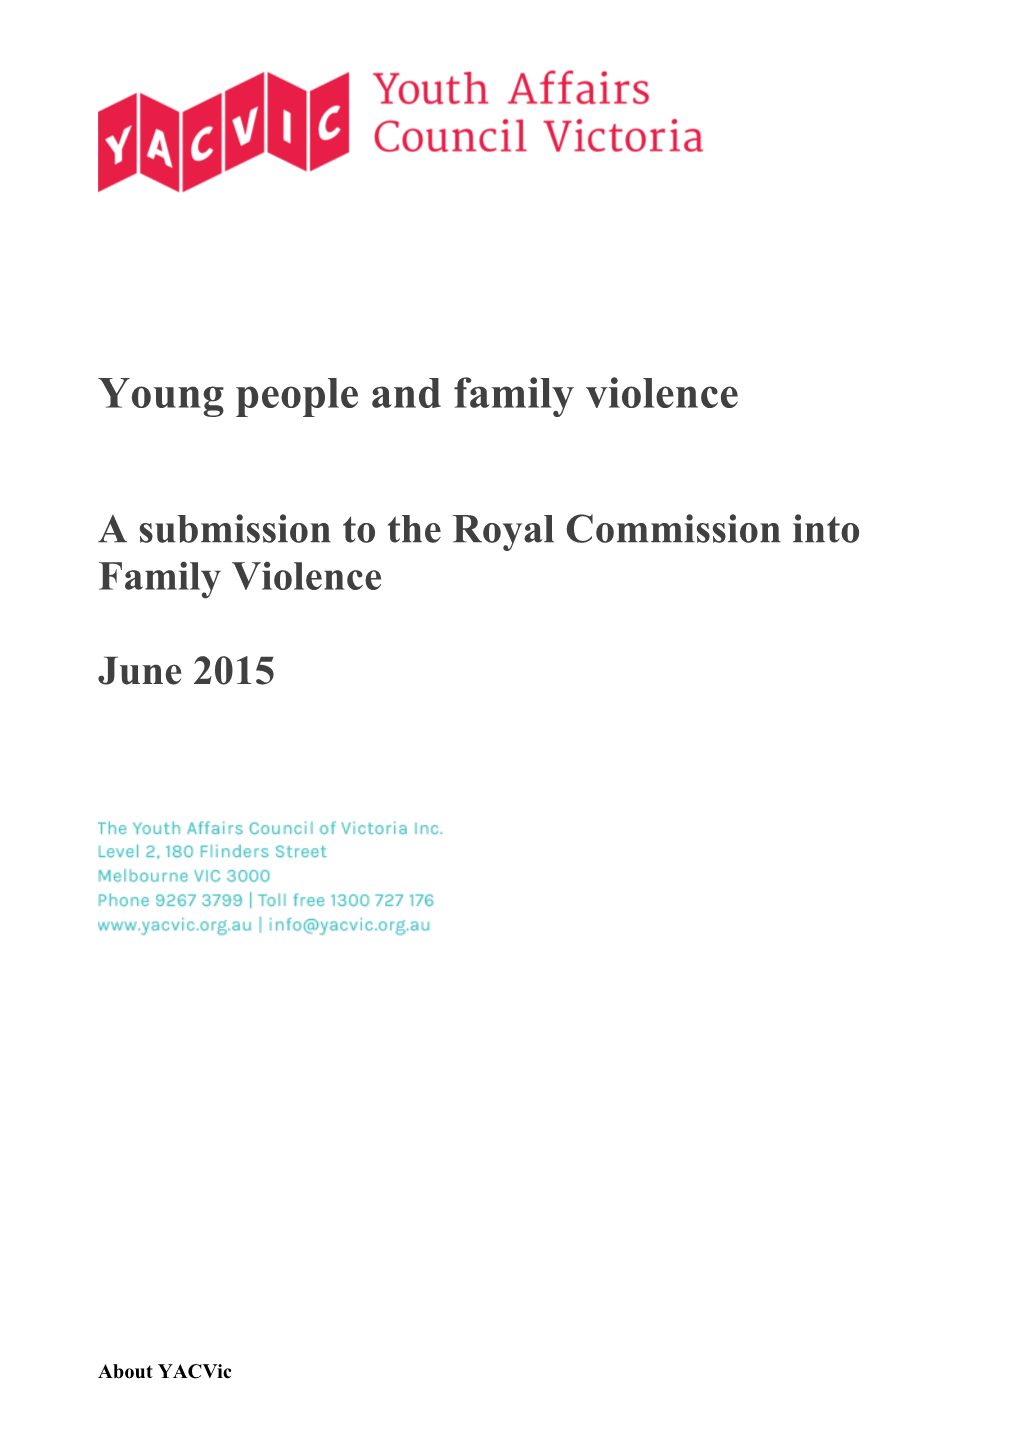 A Submission to the Royal Commission Into Family Violence